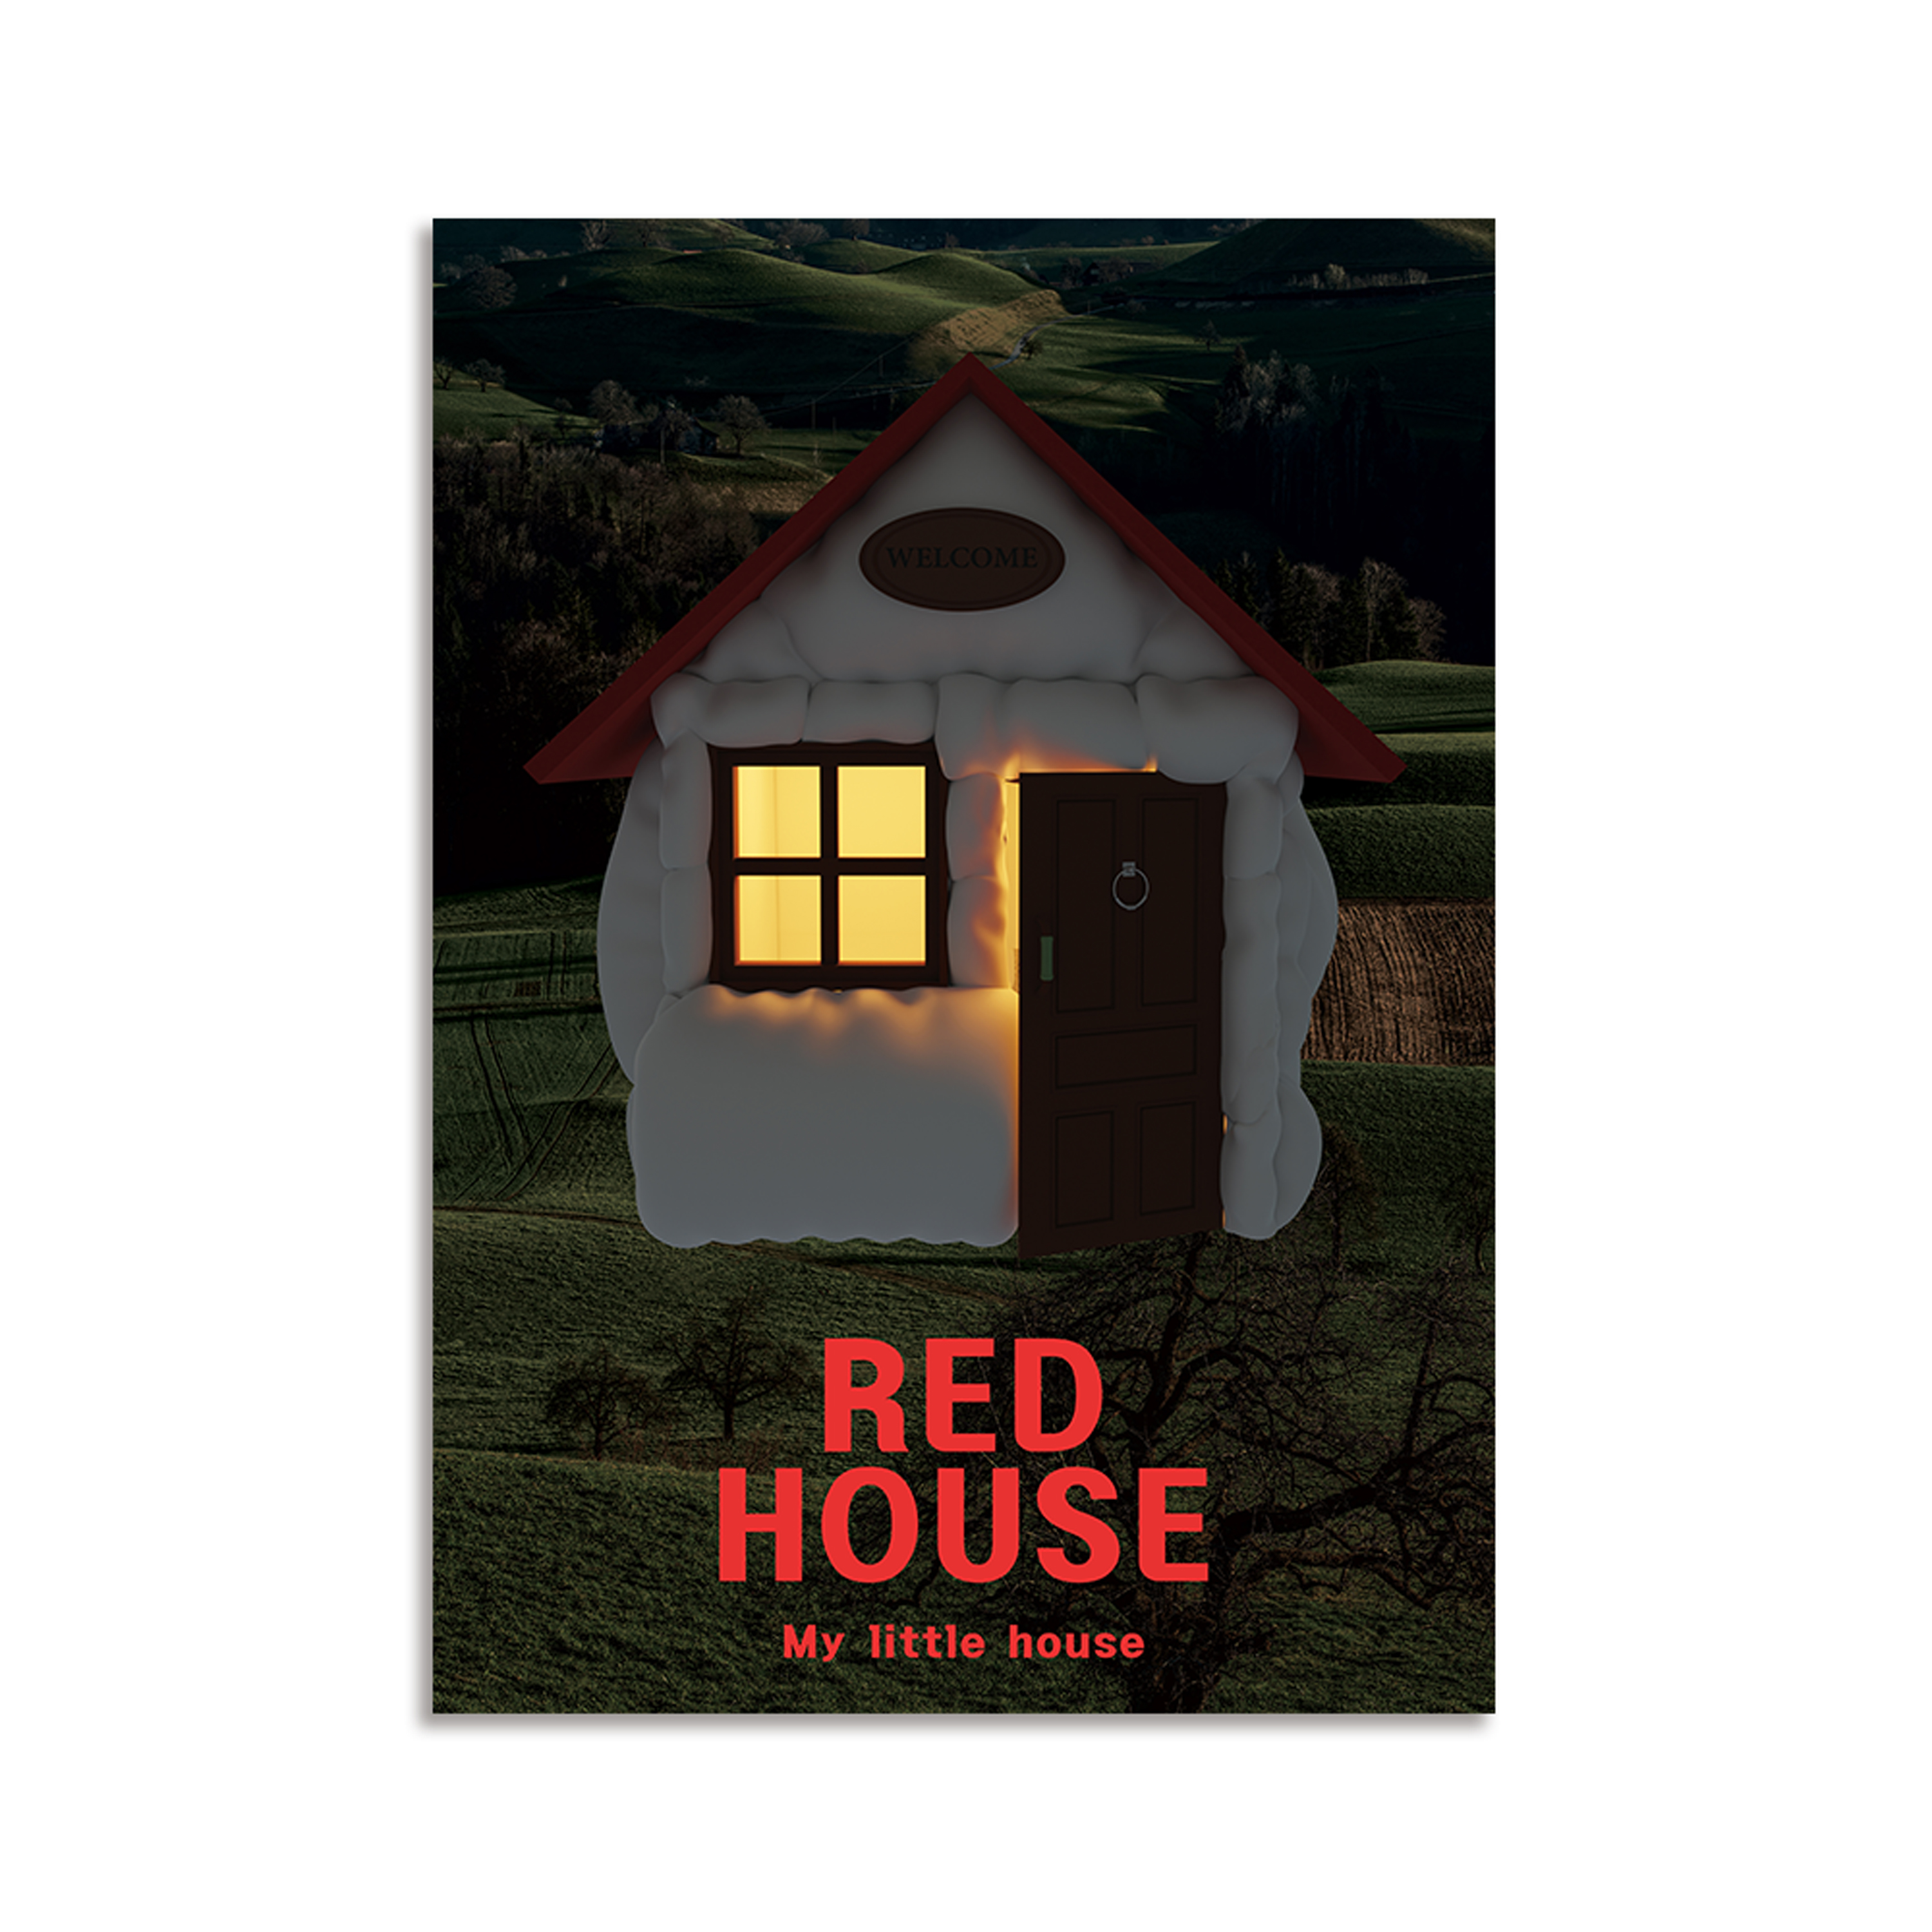 RED HOUSE #night